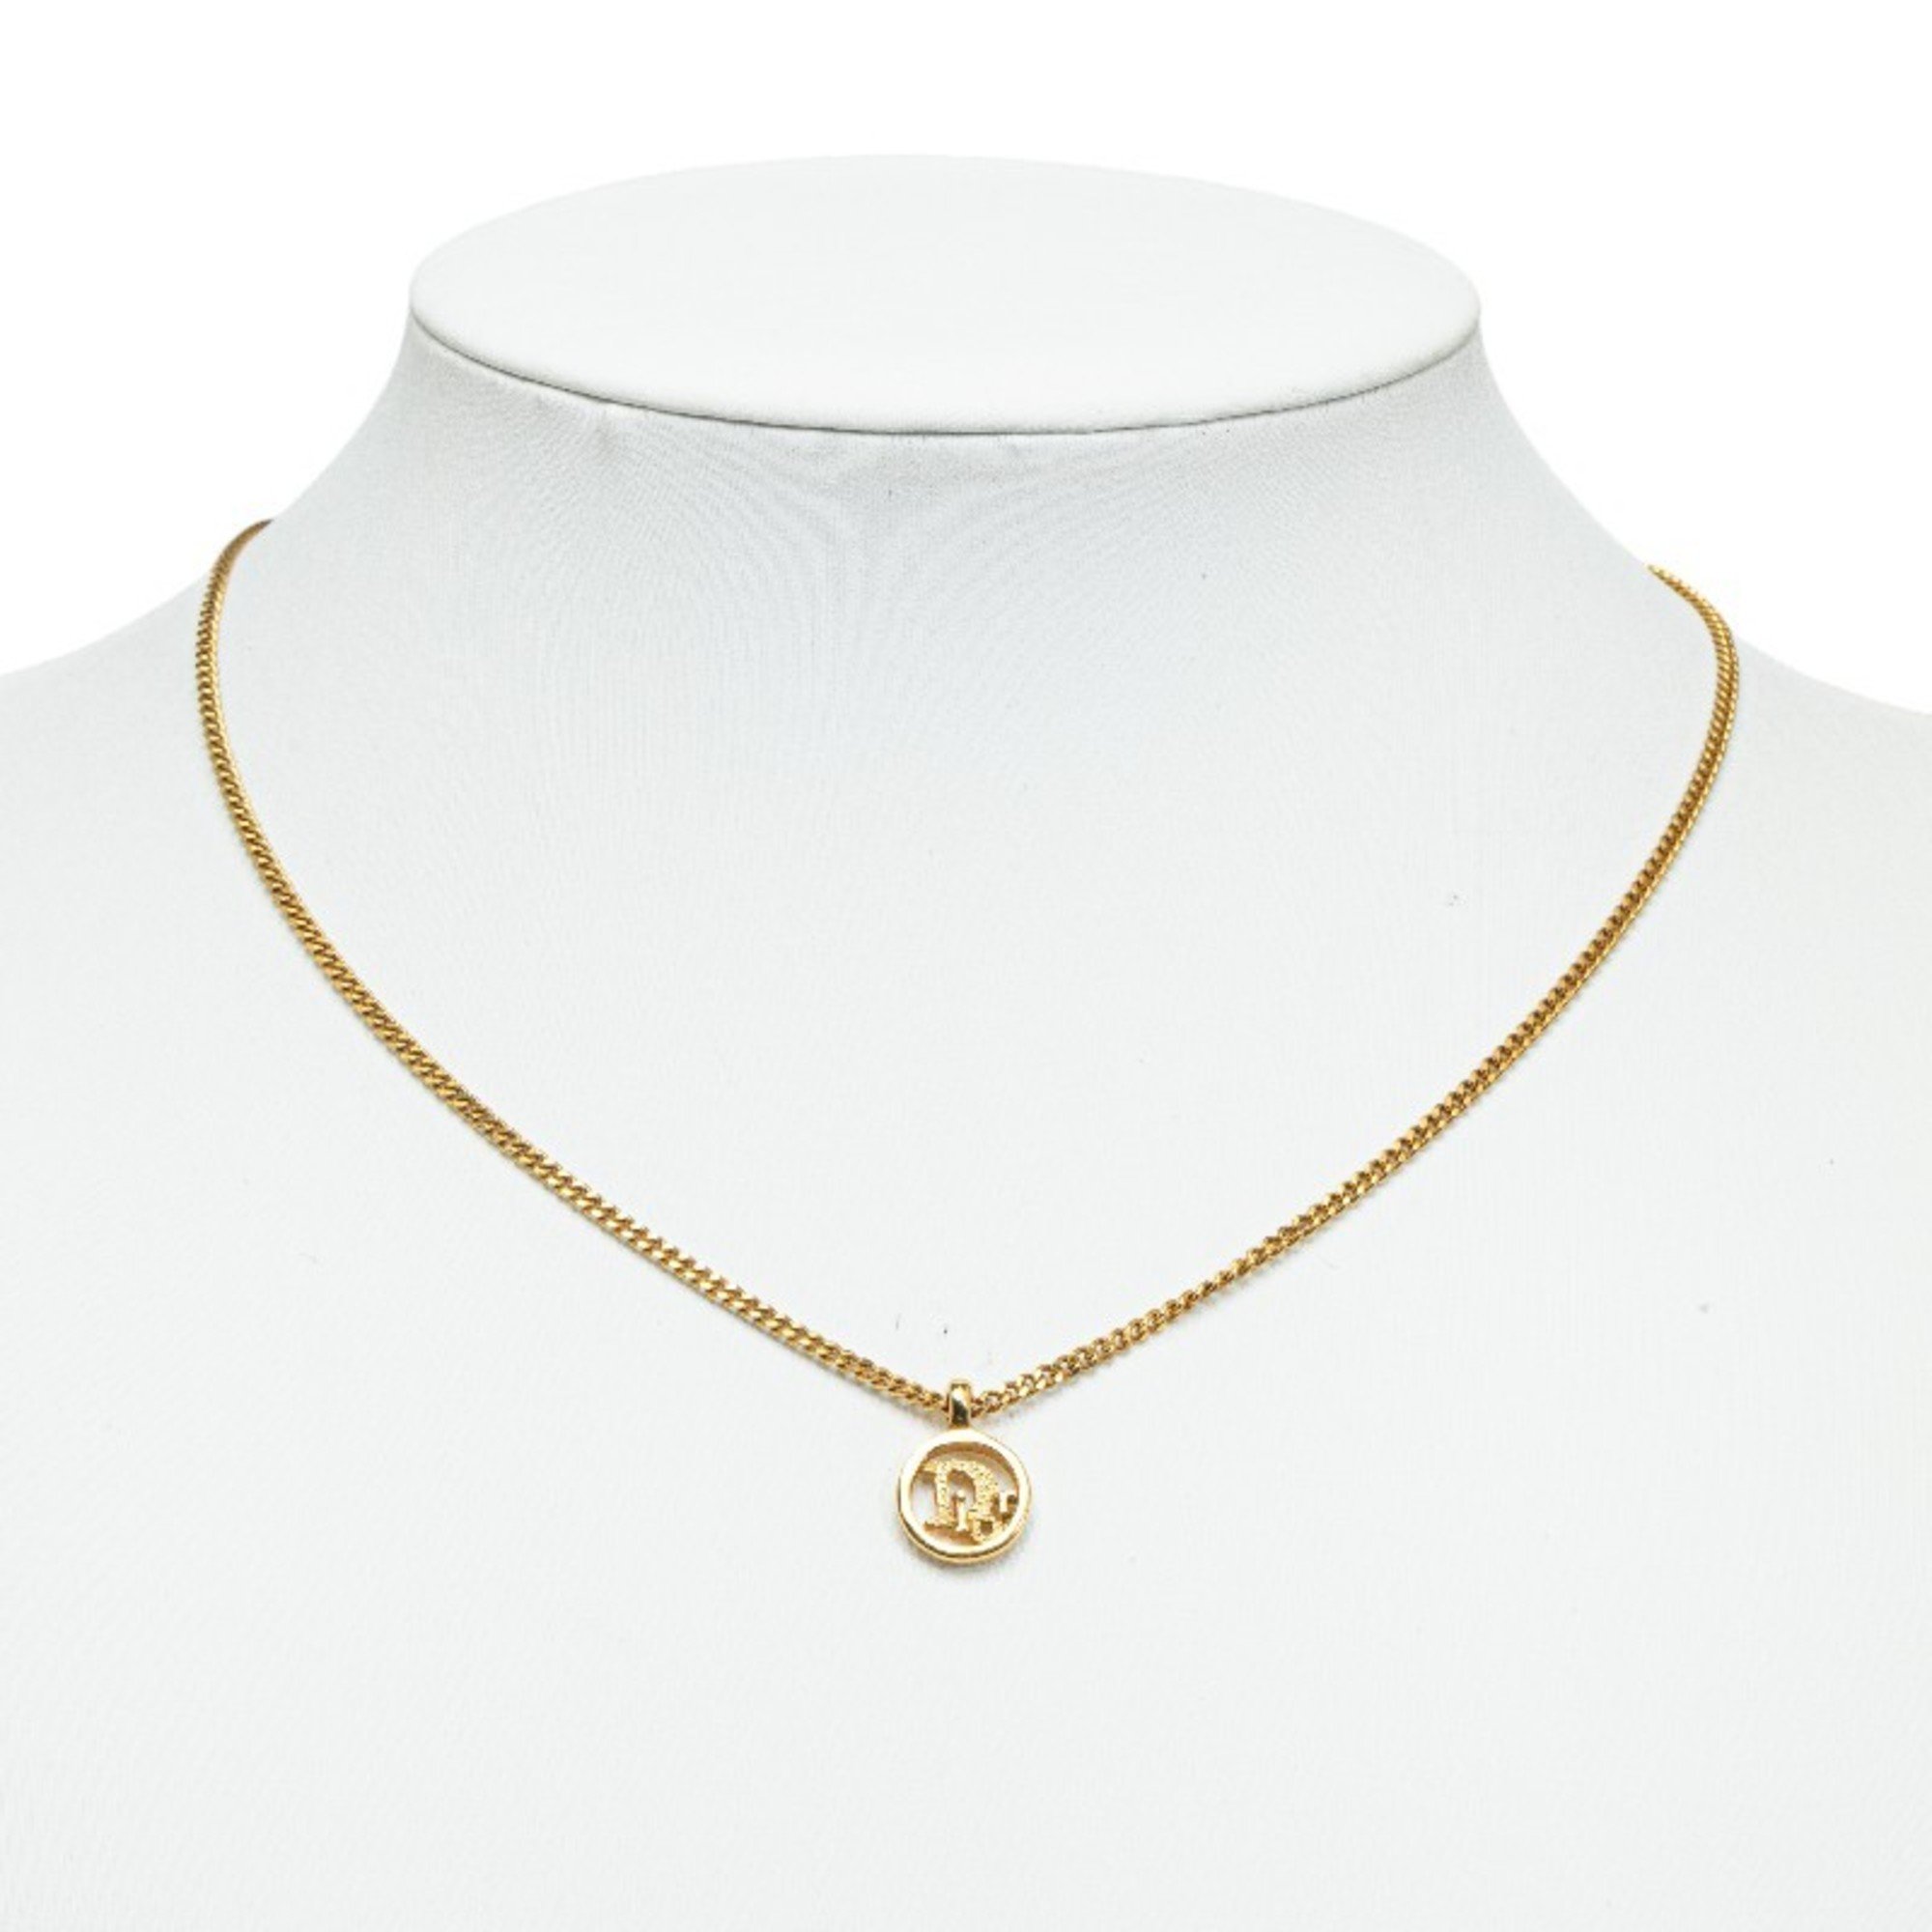 Christian Dior Dior necklace gold plated ladies